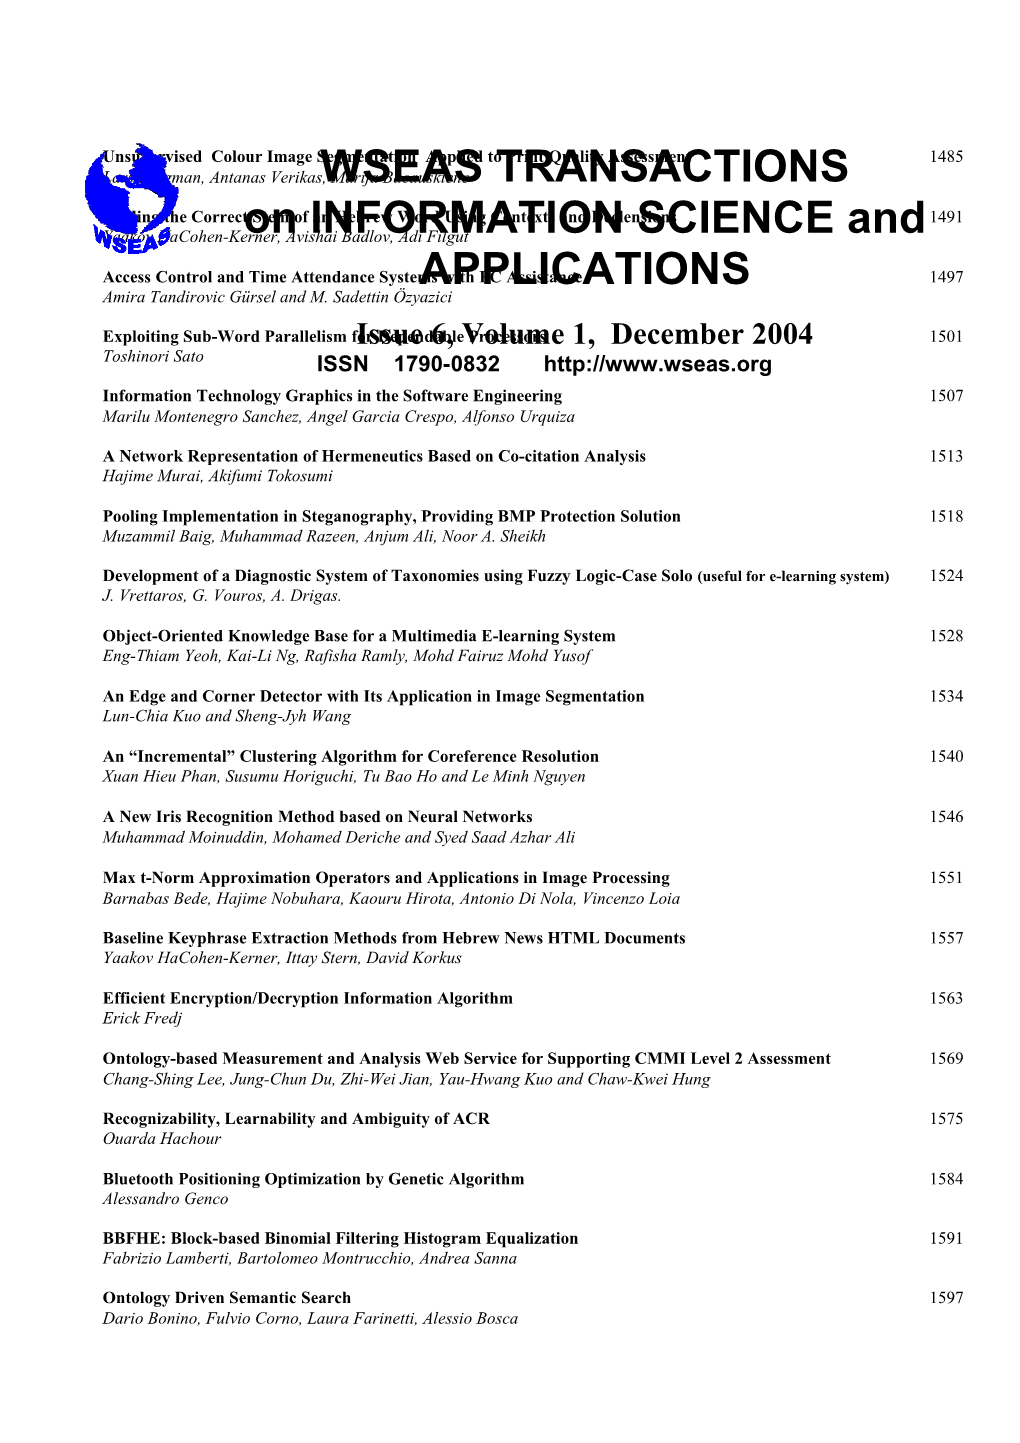 WSEAS Trans. on INFORMATION SCIENCE and APPLICATIONS, December 2004